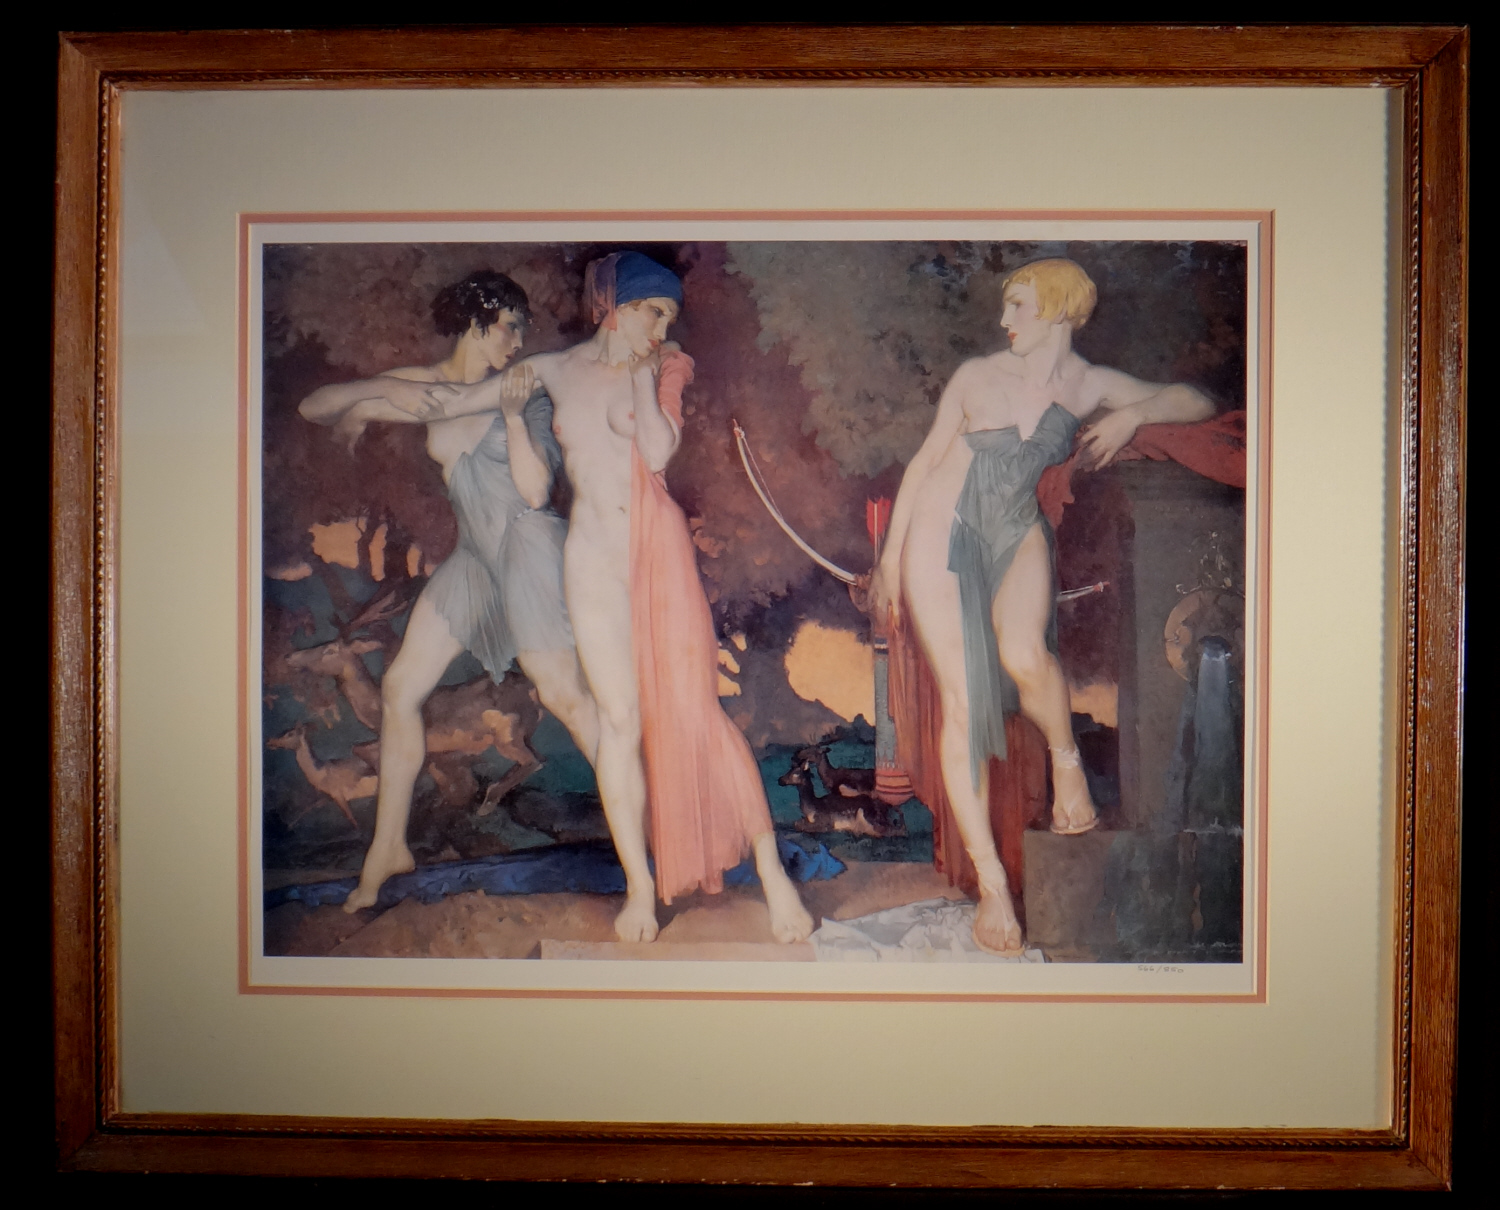 russell flint, artemis and chione, print